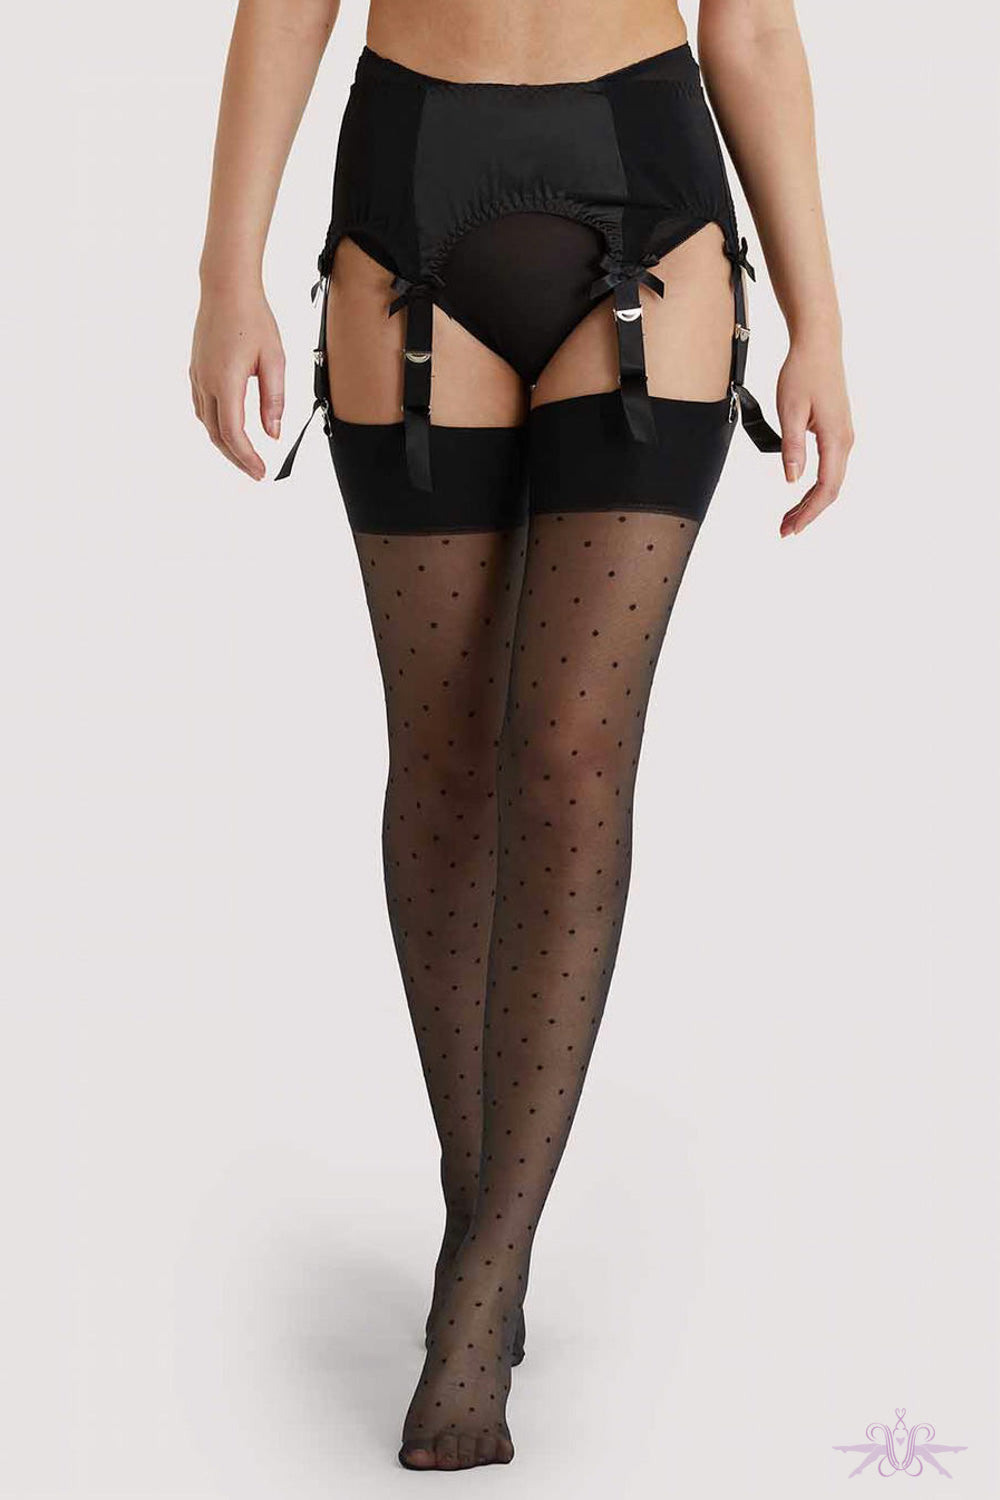 Playful Promises Black Bow Seamed Stockings